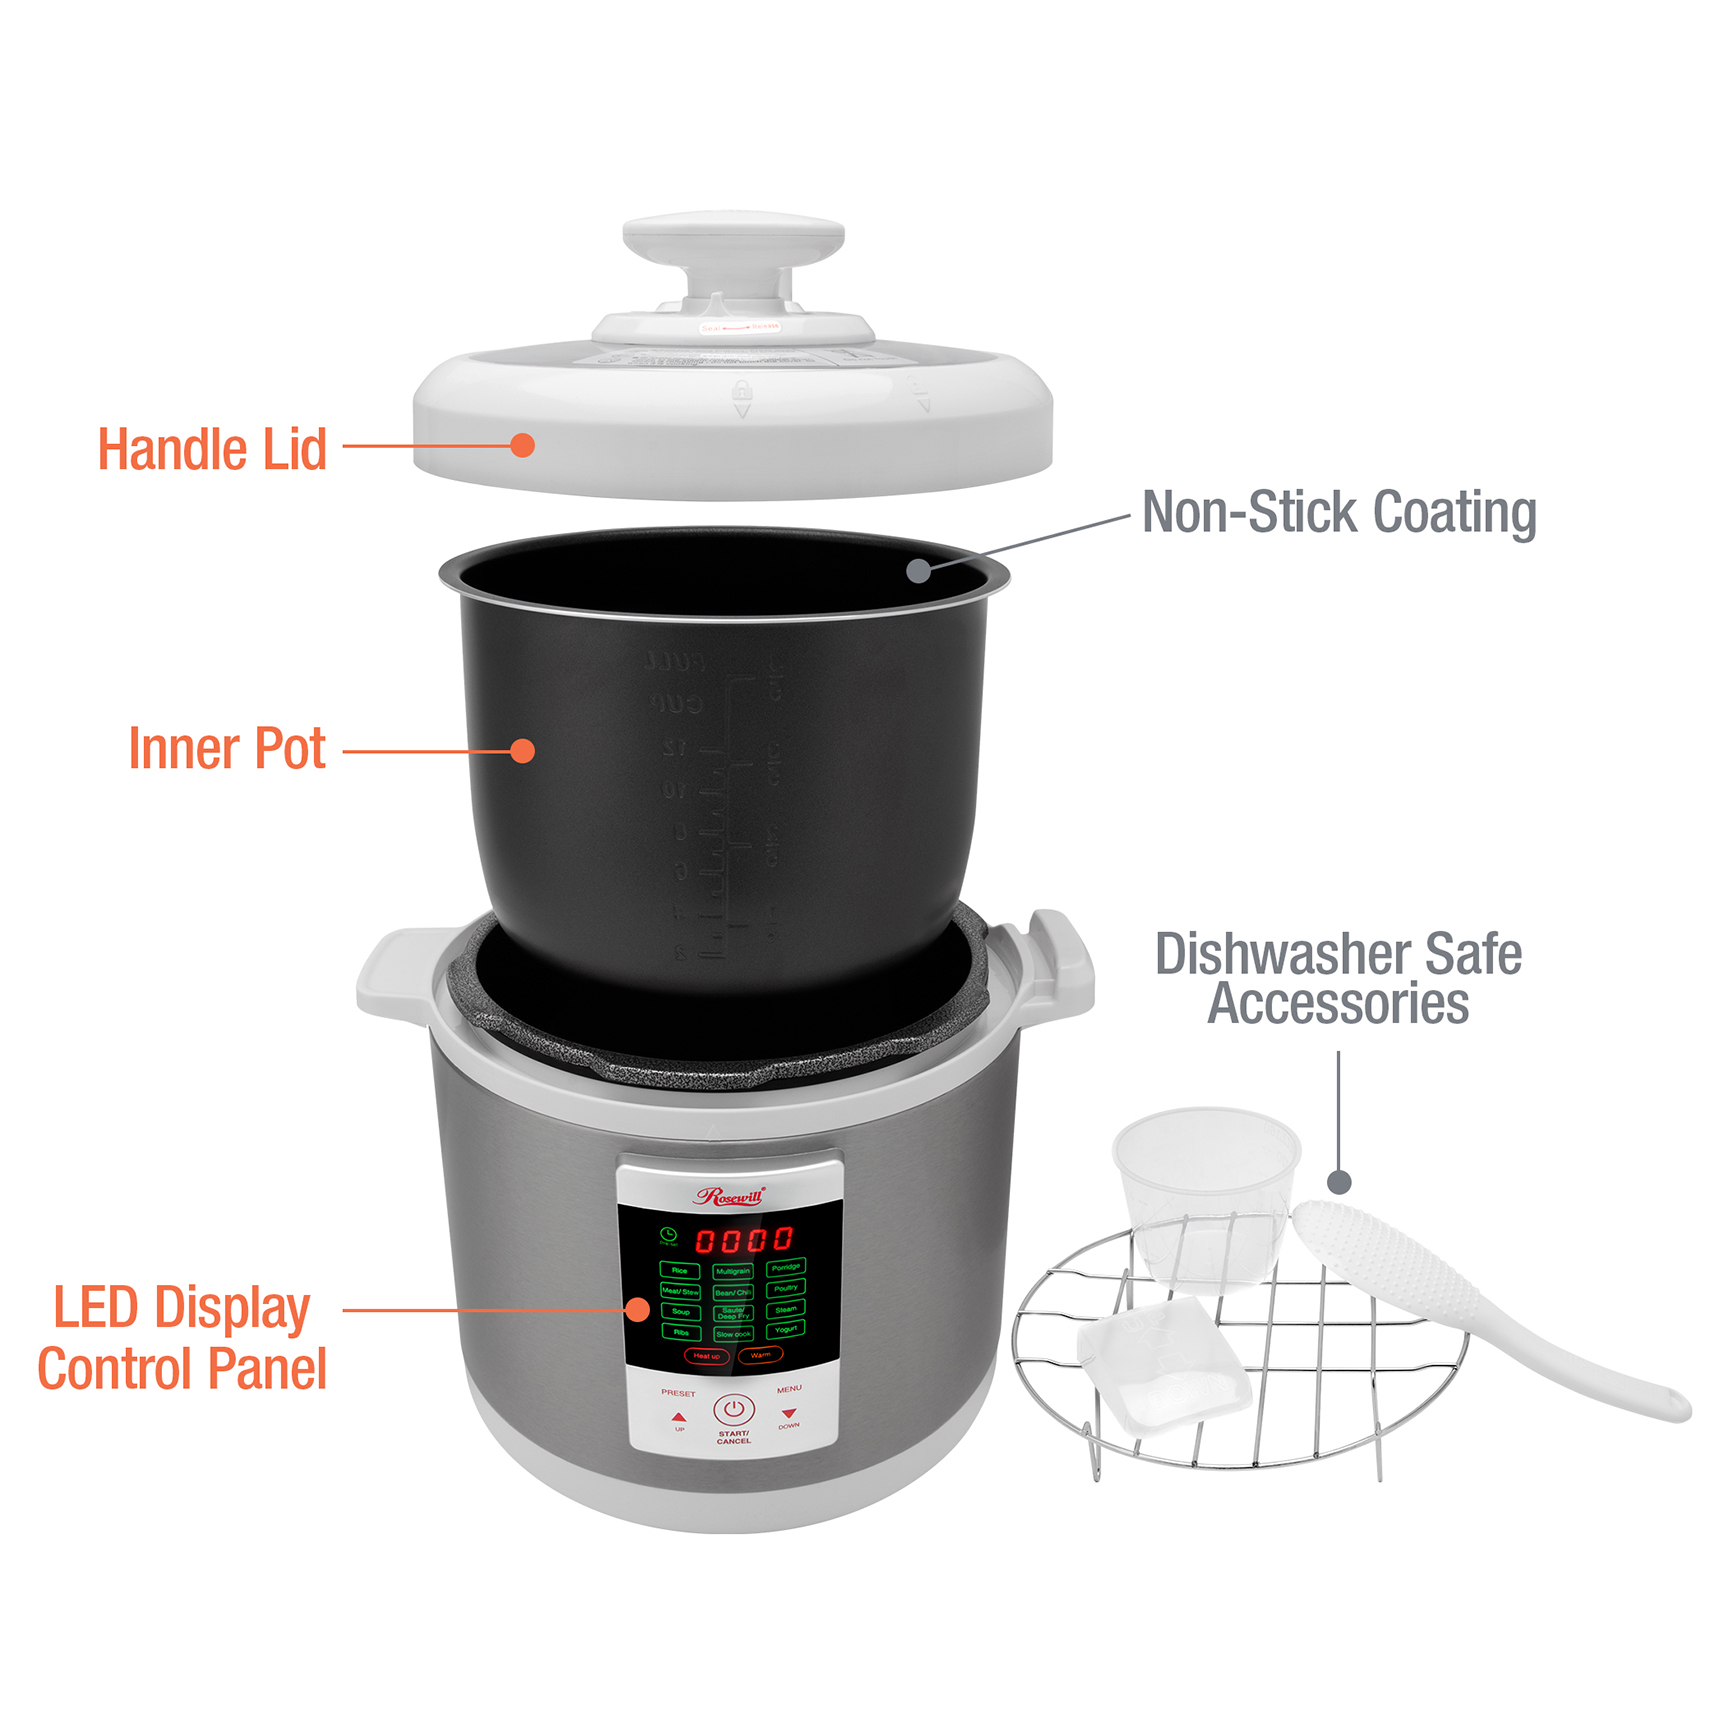 Rosewill RHPC-15001 Programmable 6.3 Quart 1000W Electric Pressure Cooker - image 4 of 7